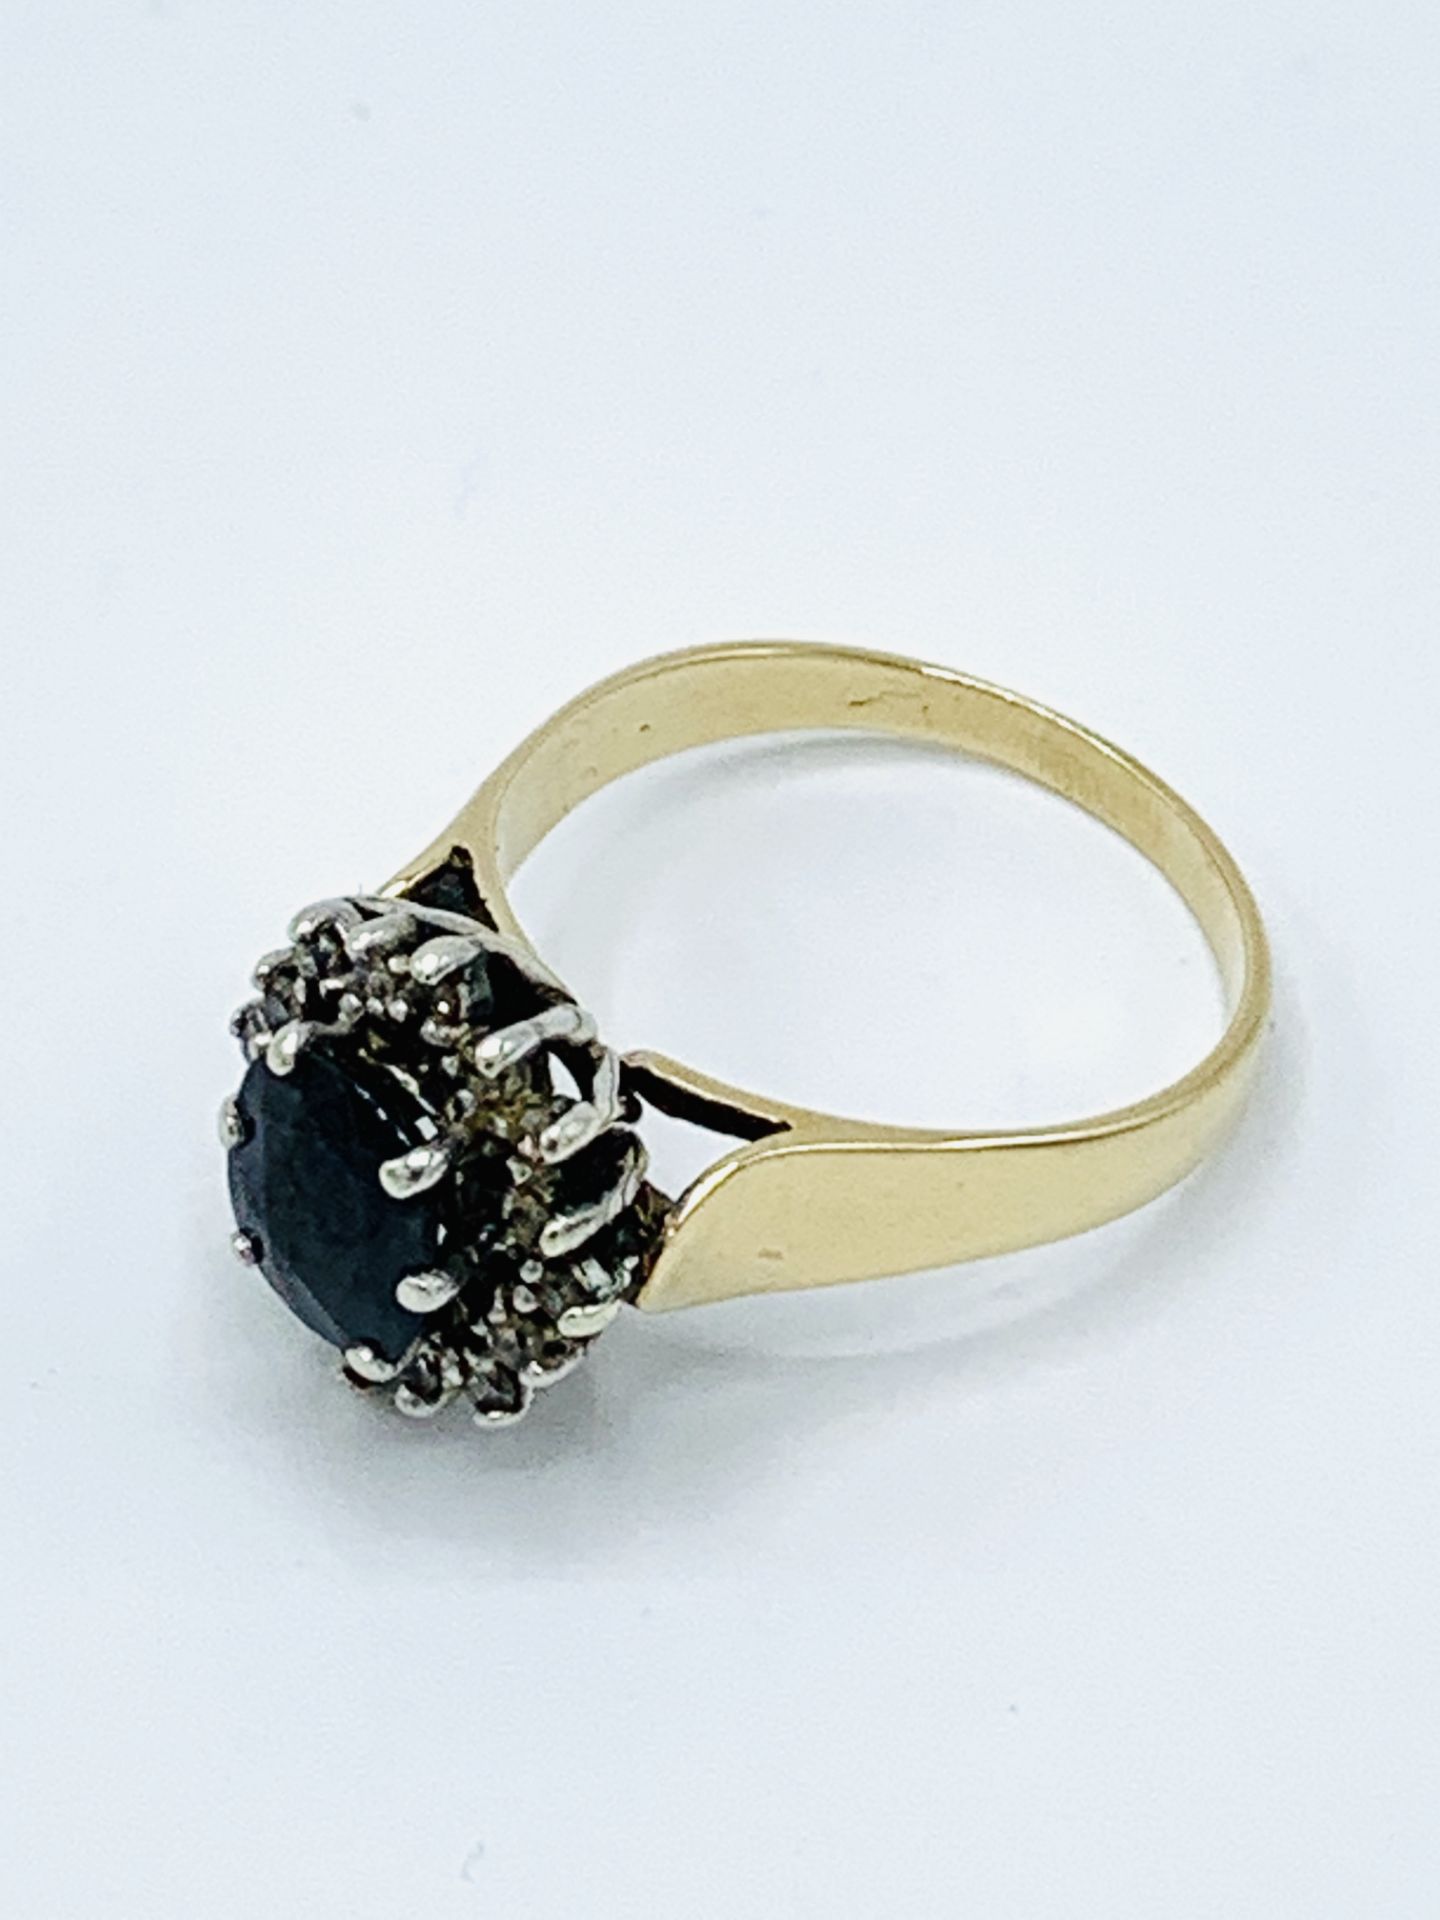 9ct gold, sapphire and diamond ring, 3.9gms - Image 2 of 4